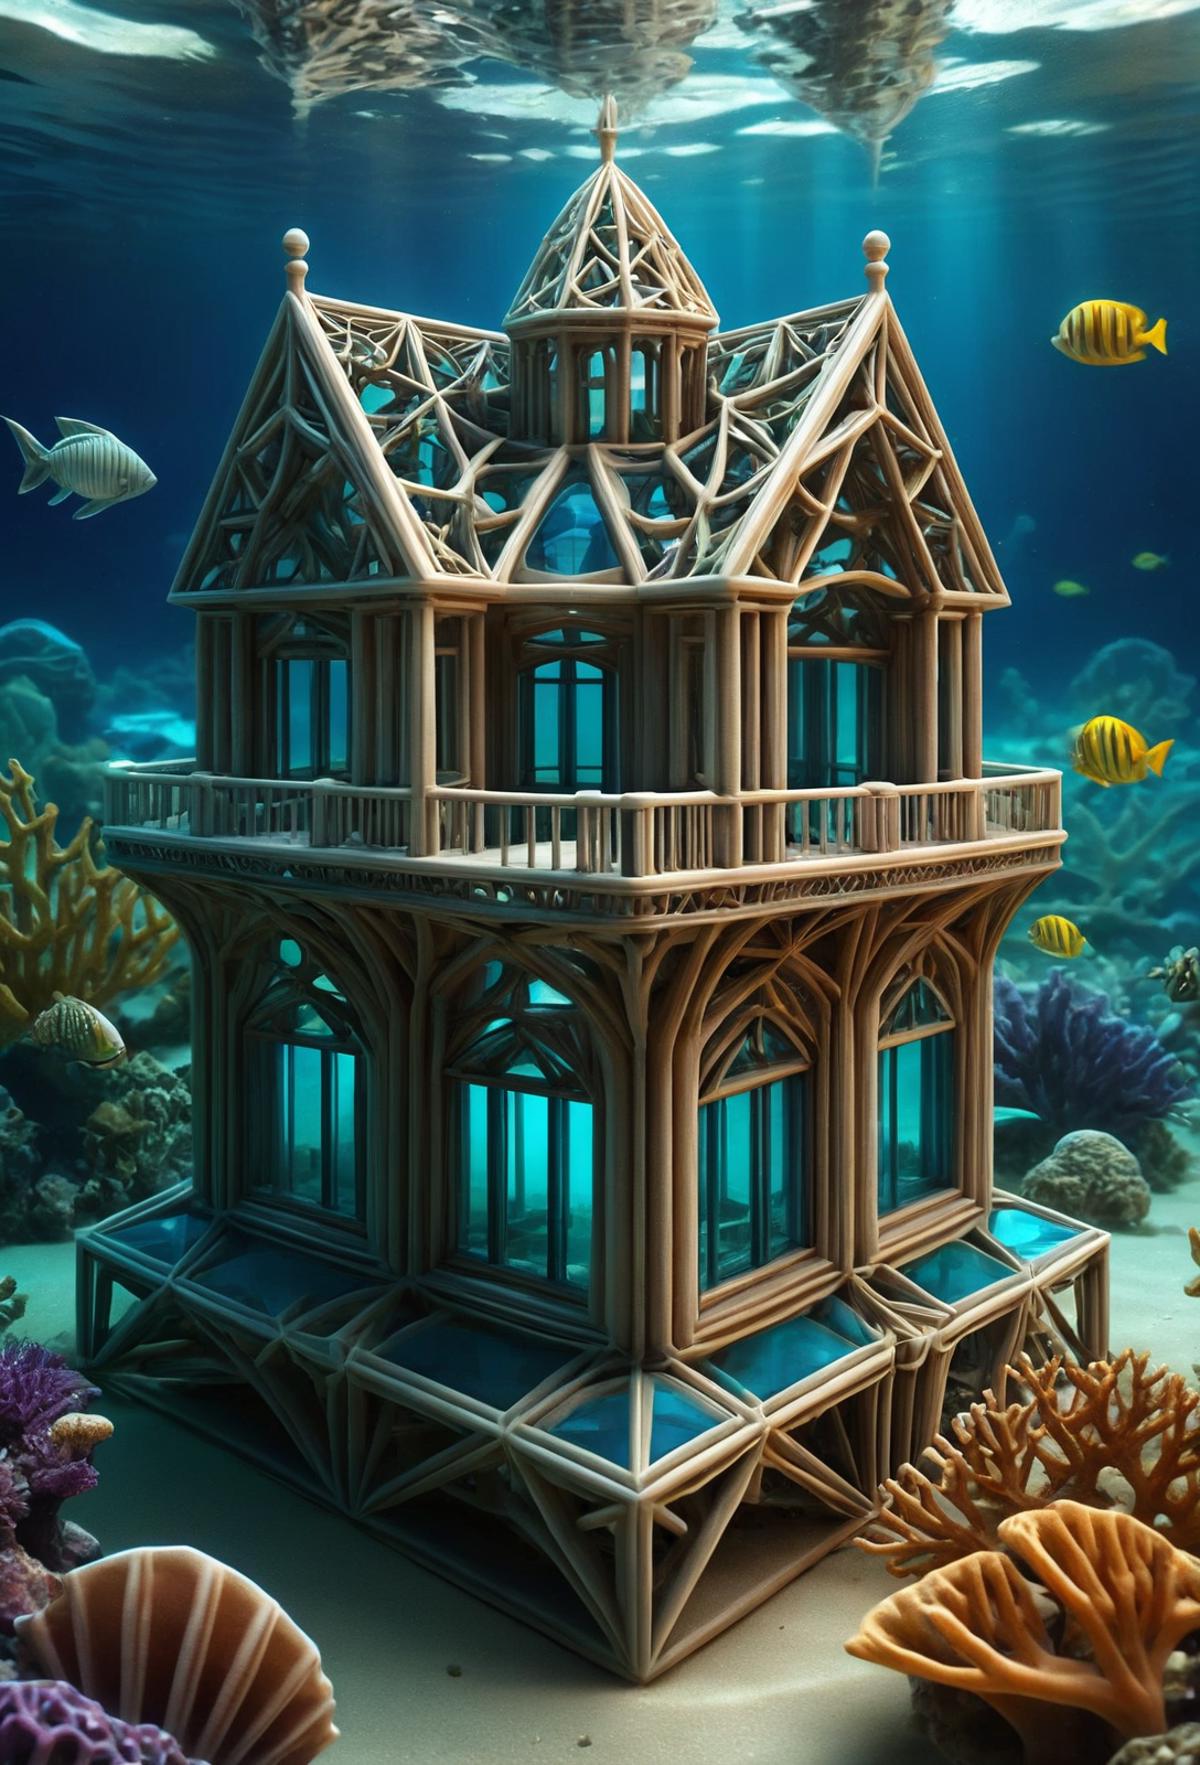 Wooden Fish House in Deep Ocean Sea with Windows and Balcony